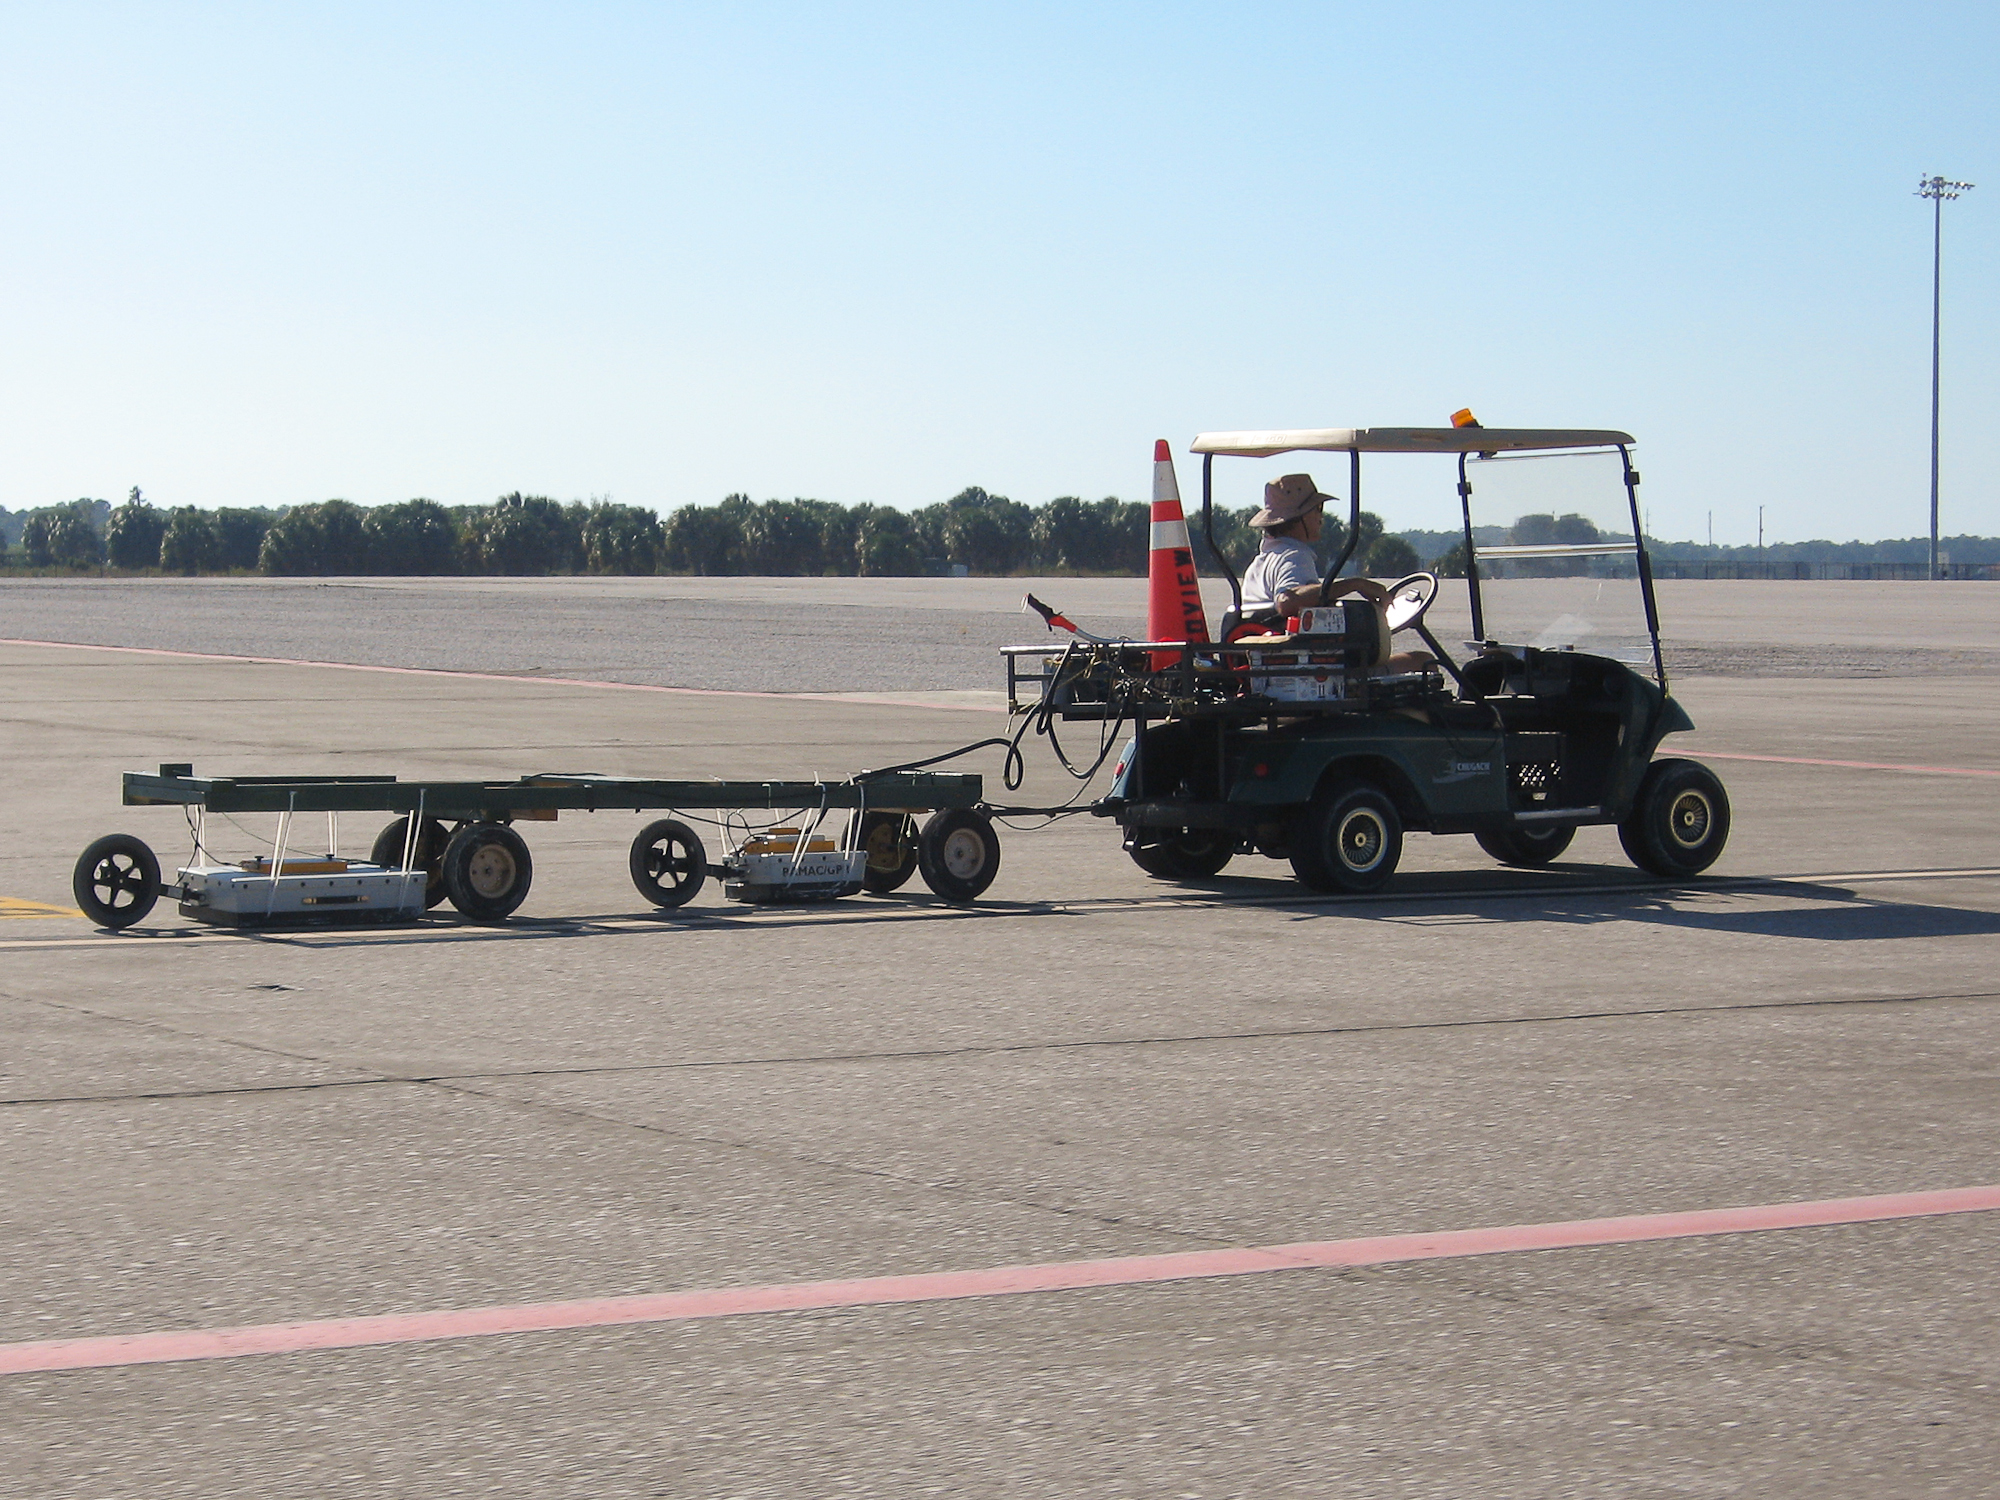 Dual Frequency GPR Survey across a taxiway of an Air Force base